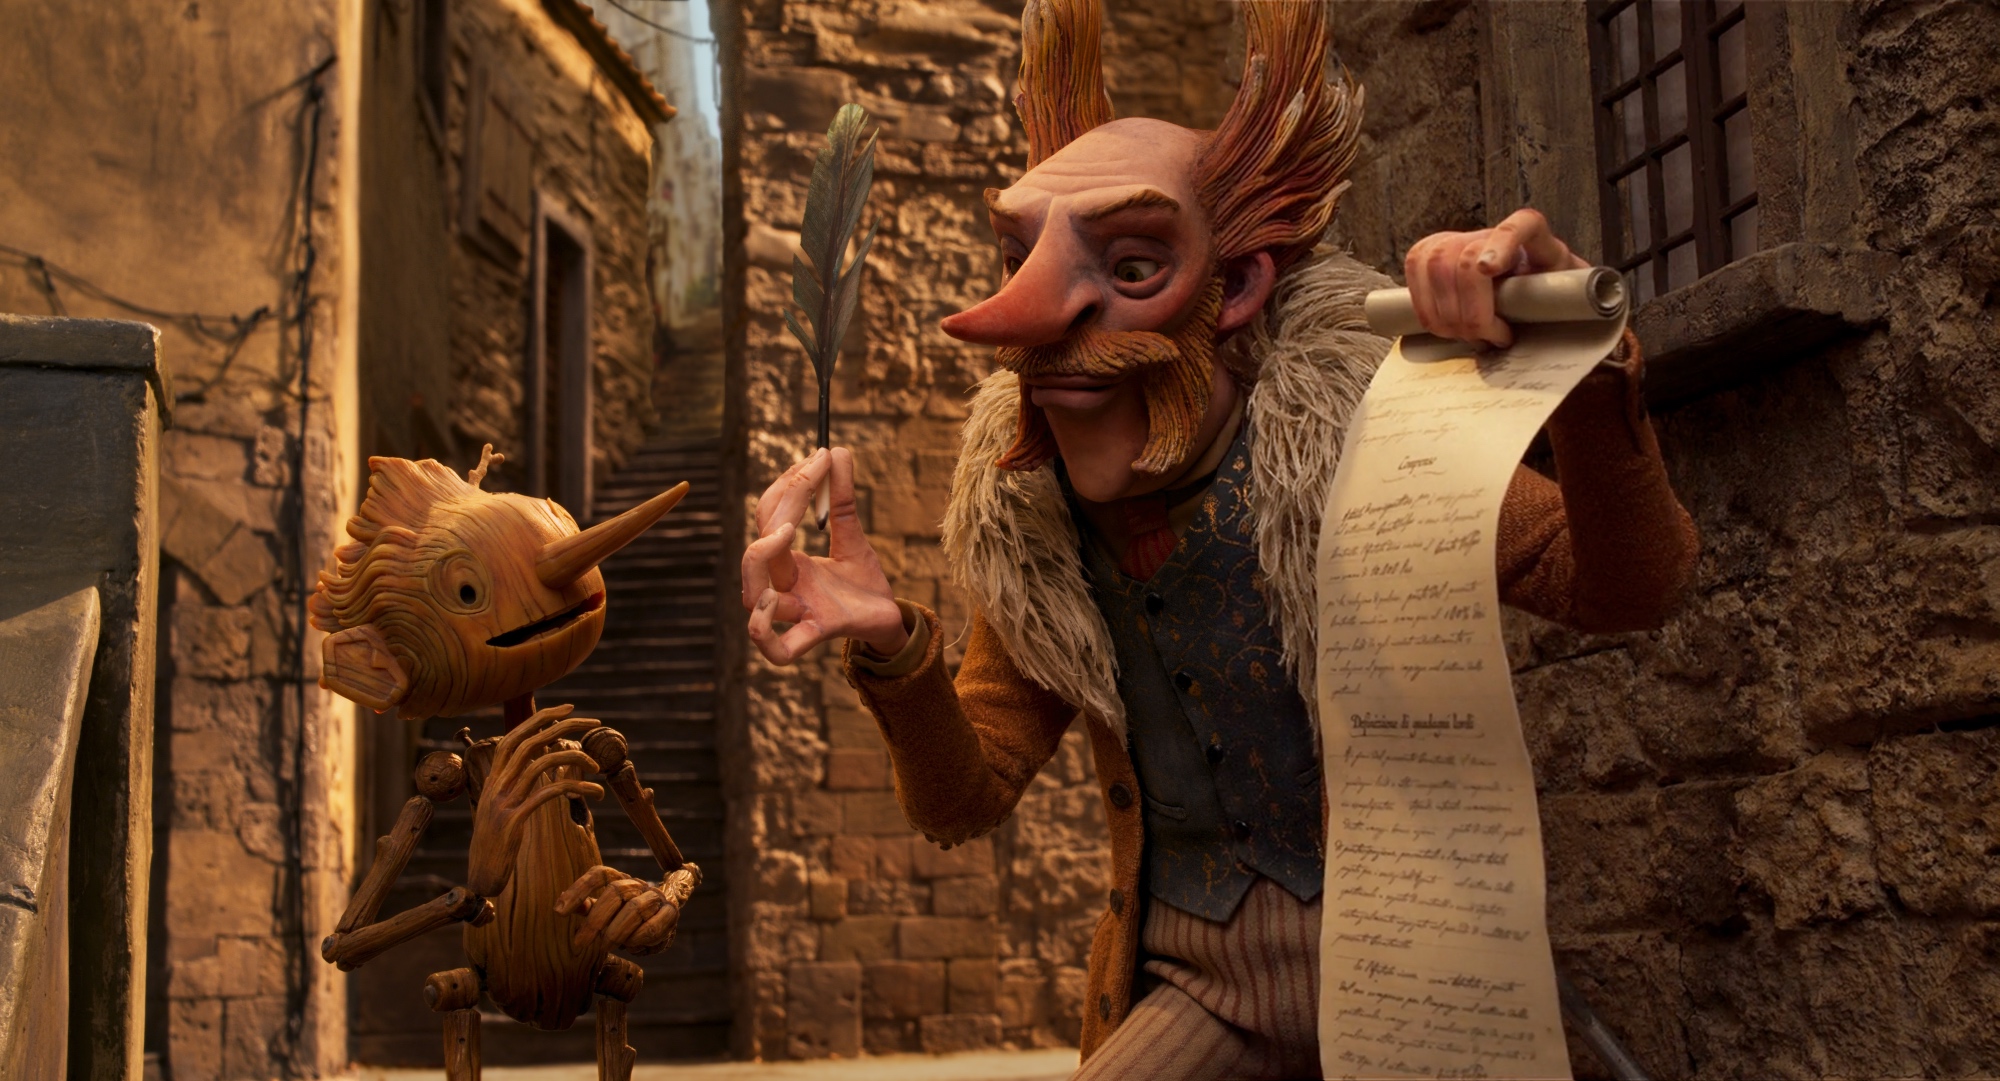 'Guillermo del Toro's Pinocchio' Pinocchio (voiced by Gregory Mann) and Count Volpe (voiced by Christoph Waltz). Volpe is holding a contract and a quill toward Pinocchio.